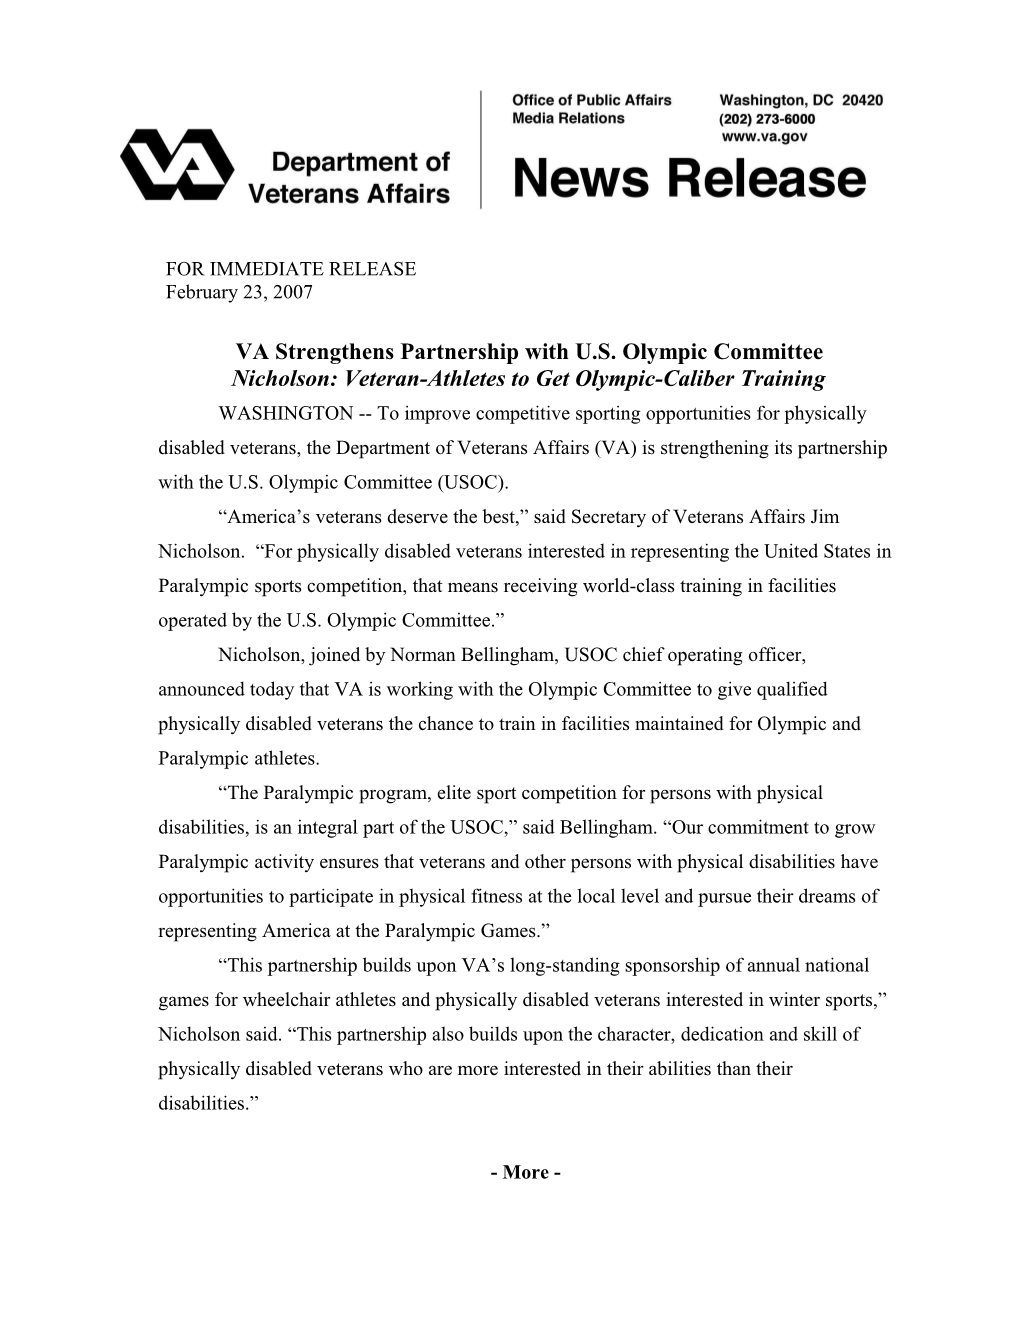 VA Strengthens Partnership with U.S. Olympic Committee